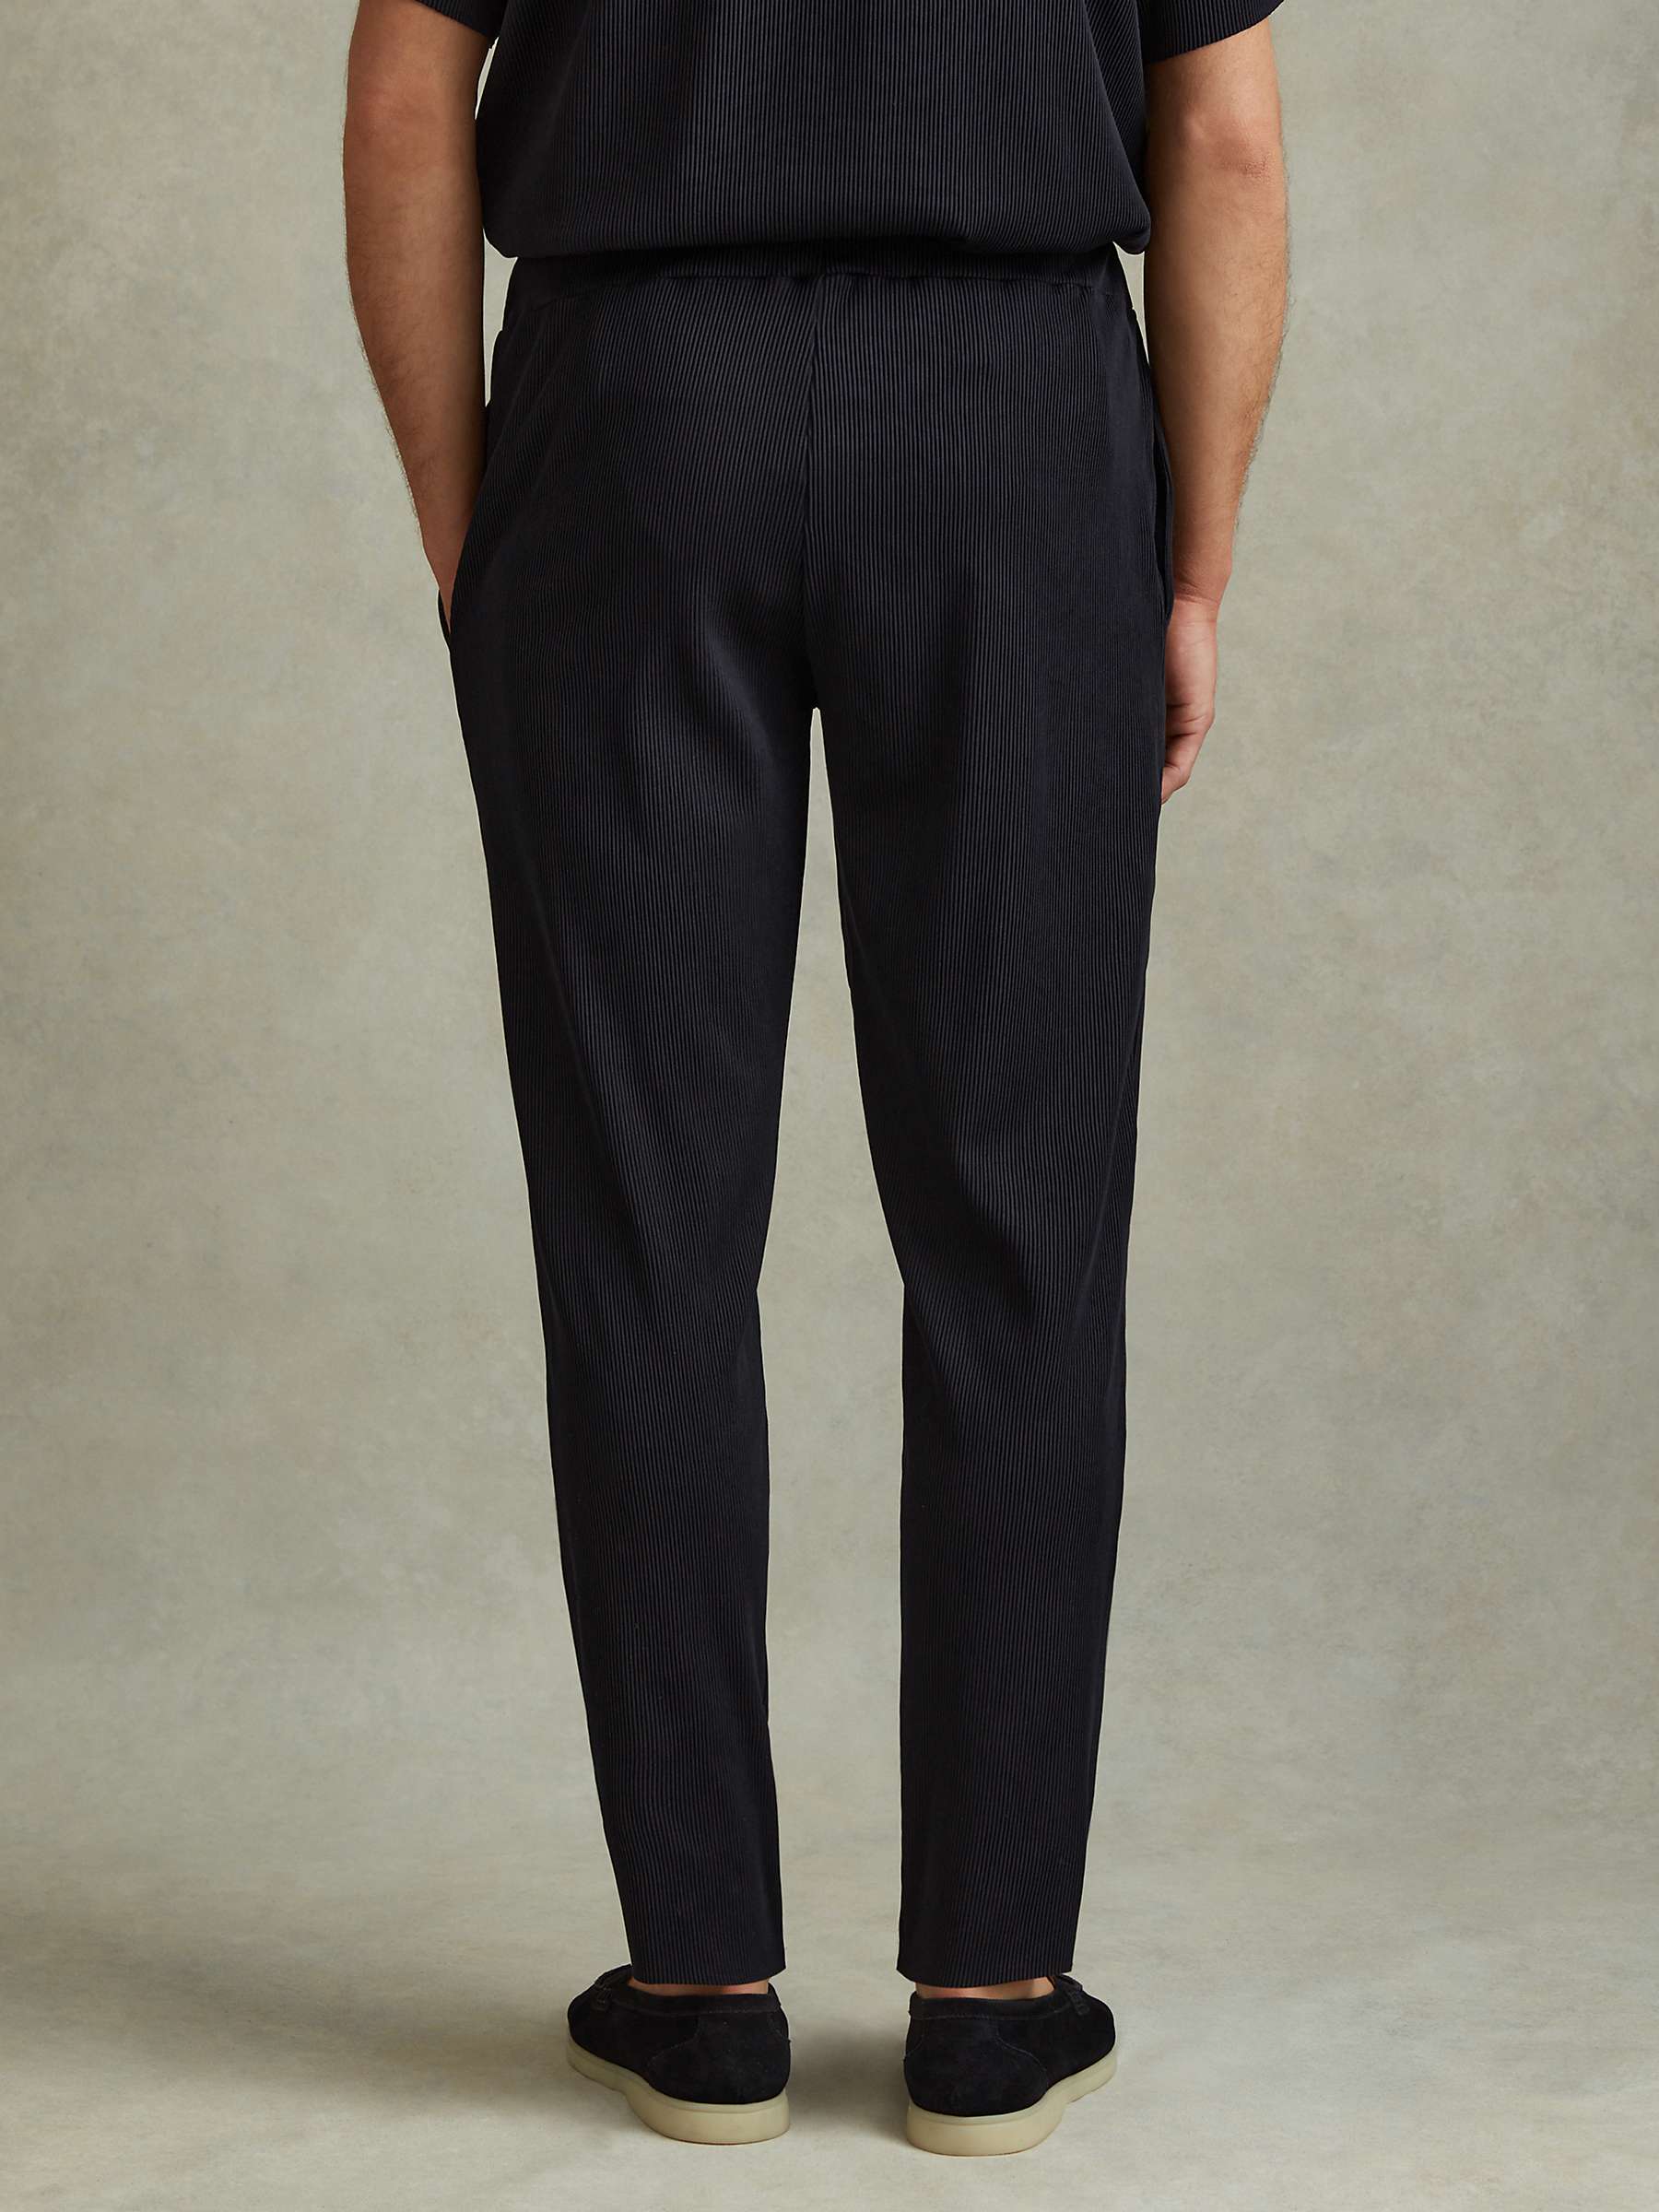 Buy Reiss Cyrus Trousers Online at johnlewis.com